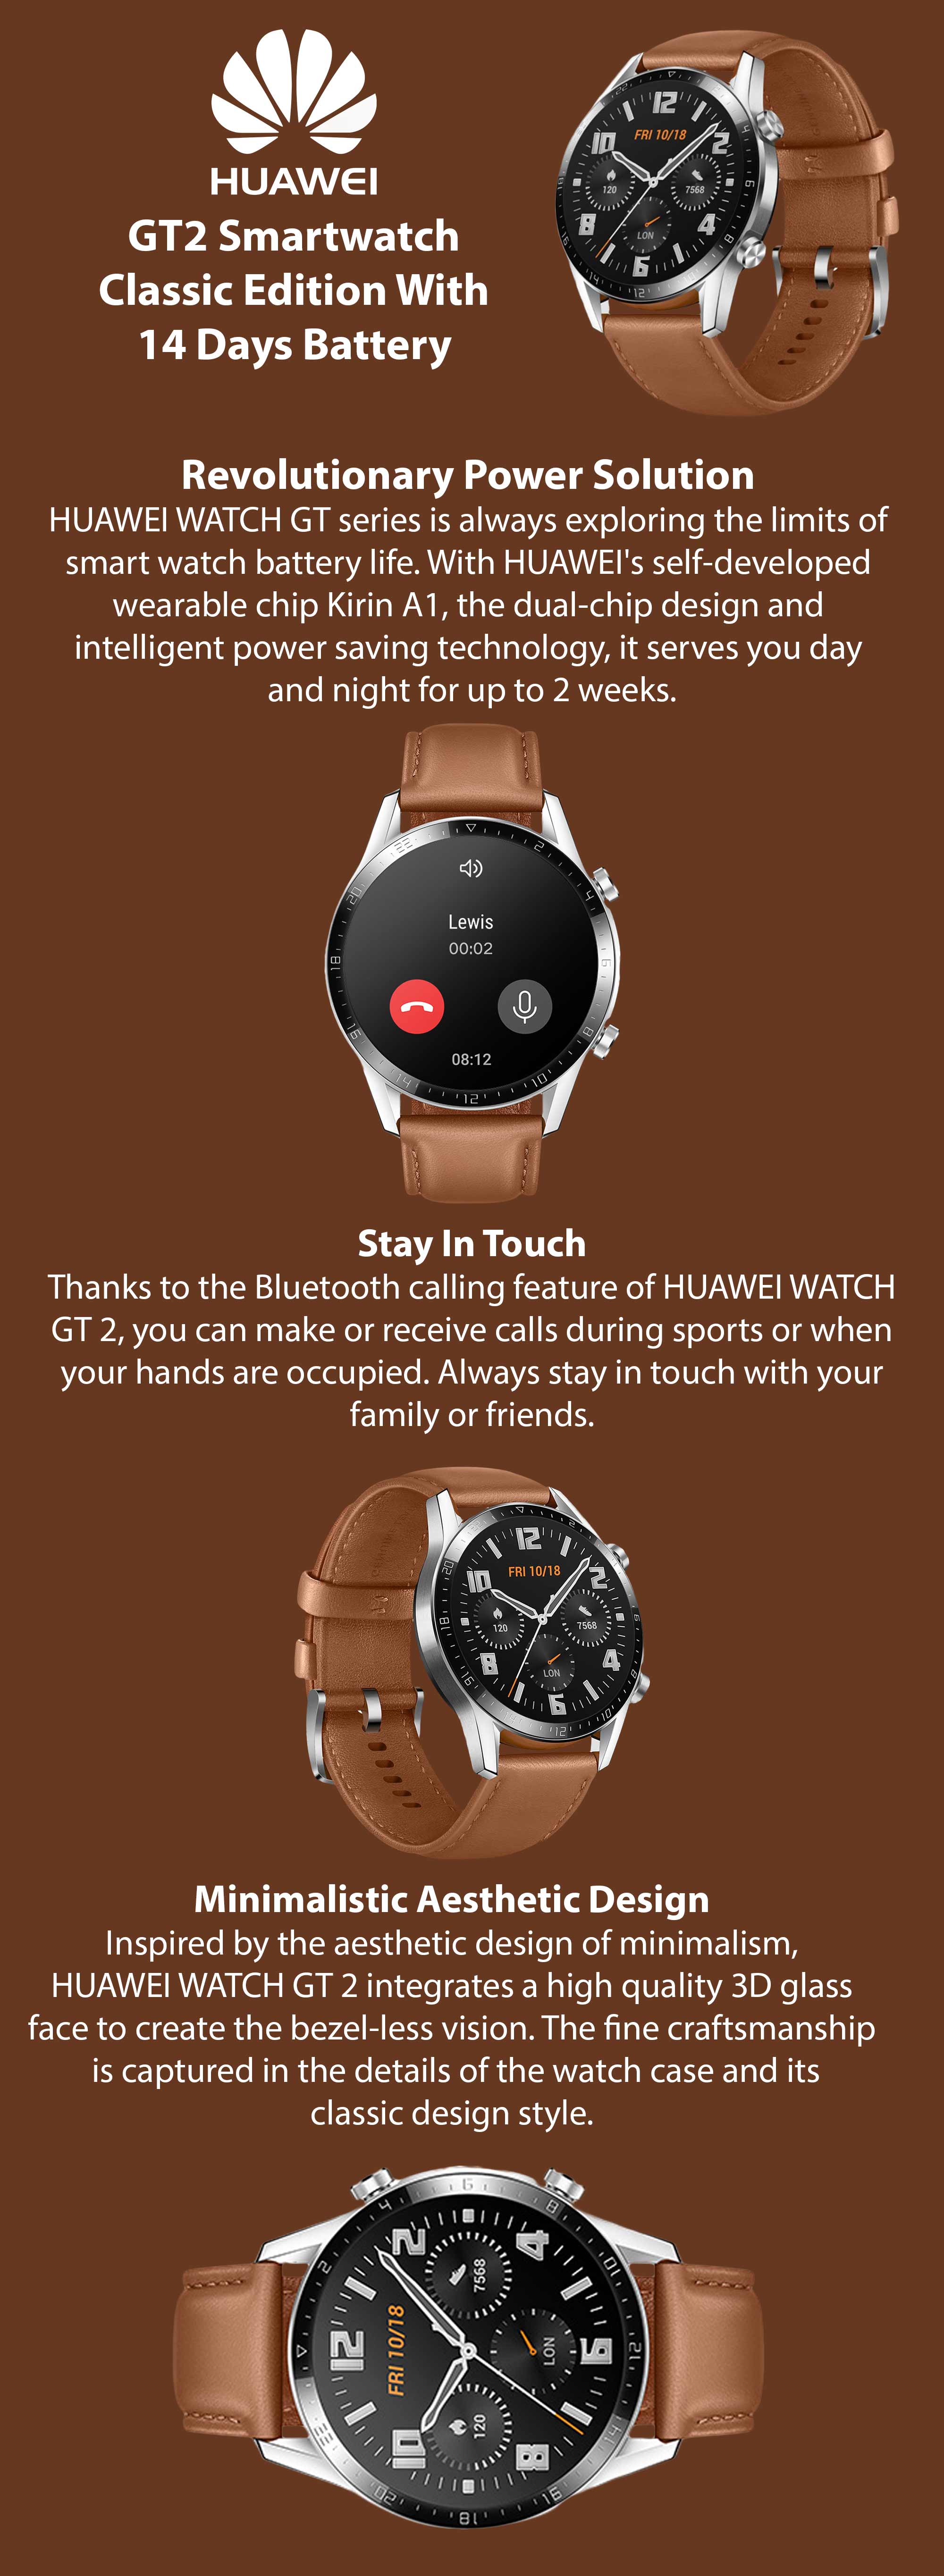 GT2 Smartwatch  Classic Edition With 14 Days Battery 46mm Pebble Brown